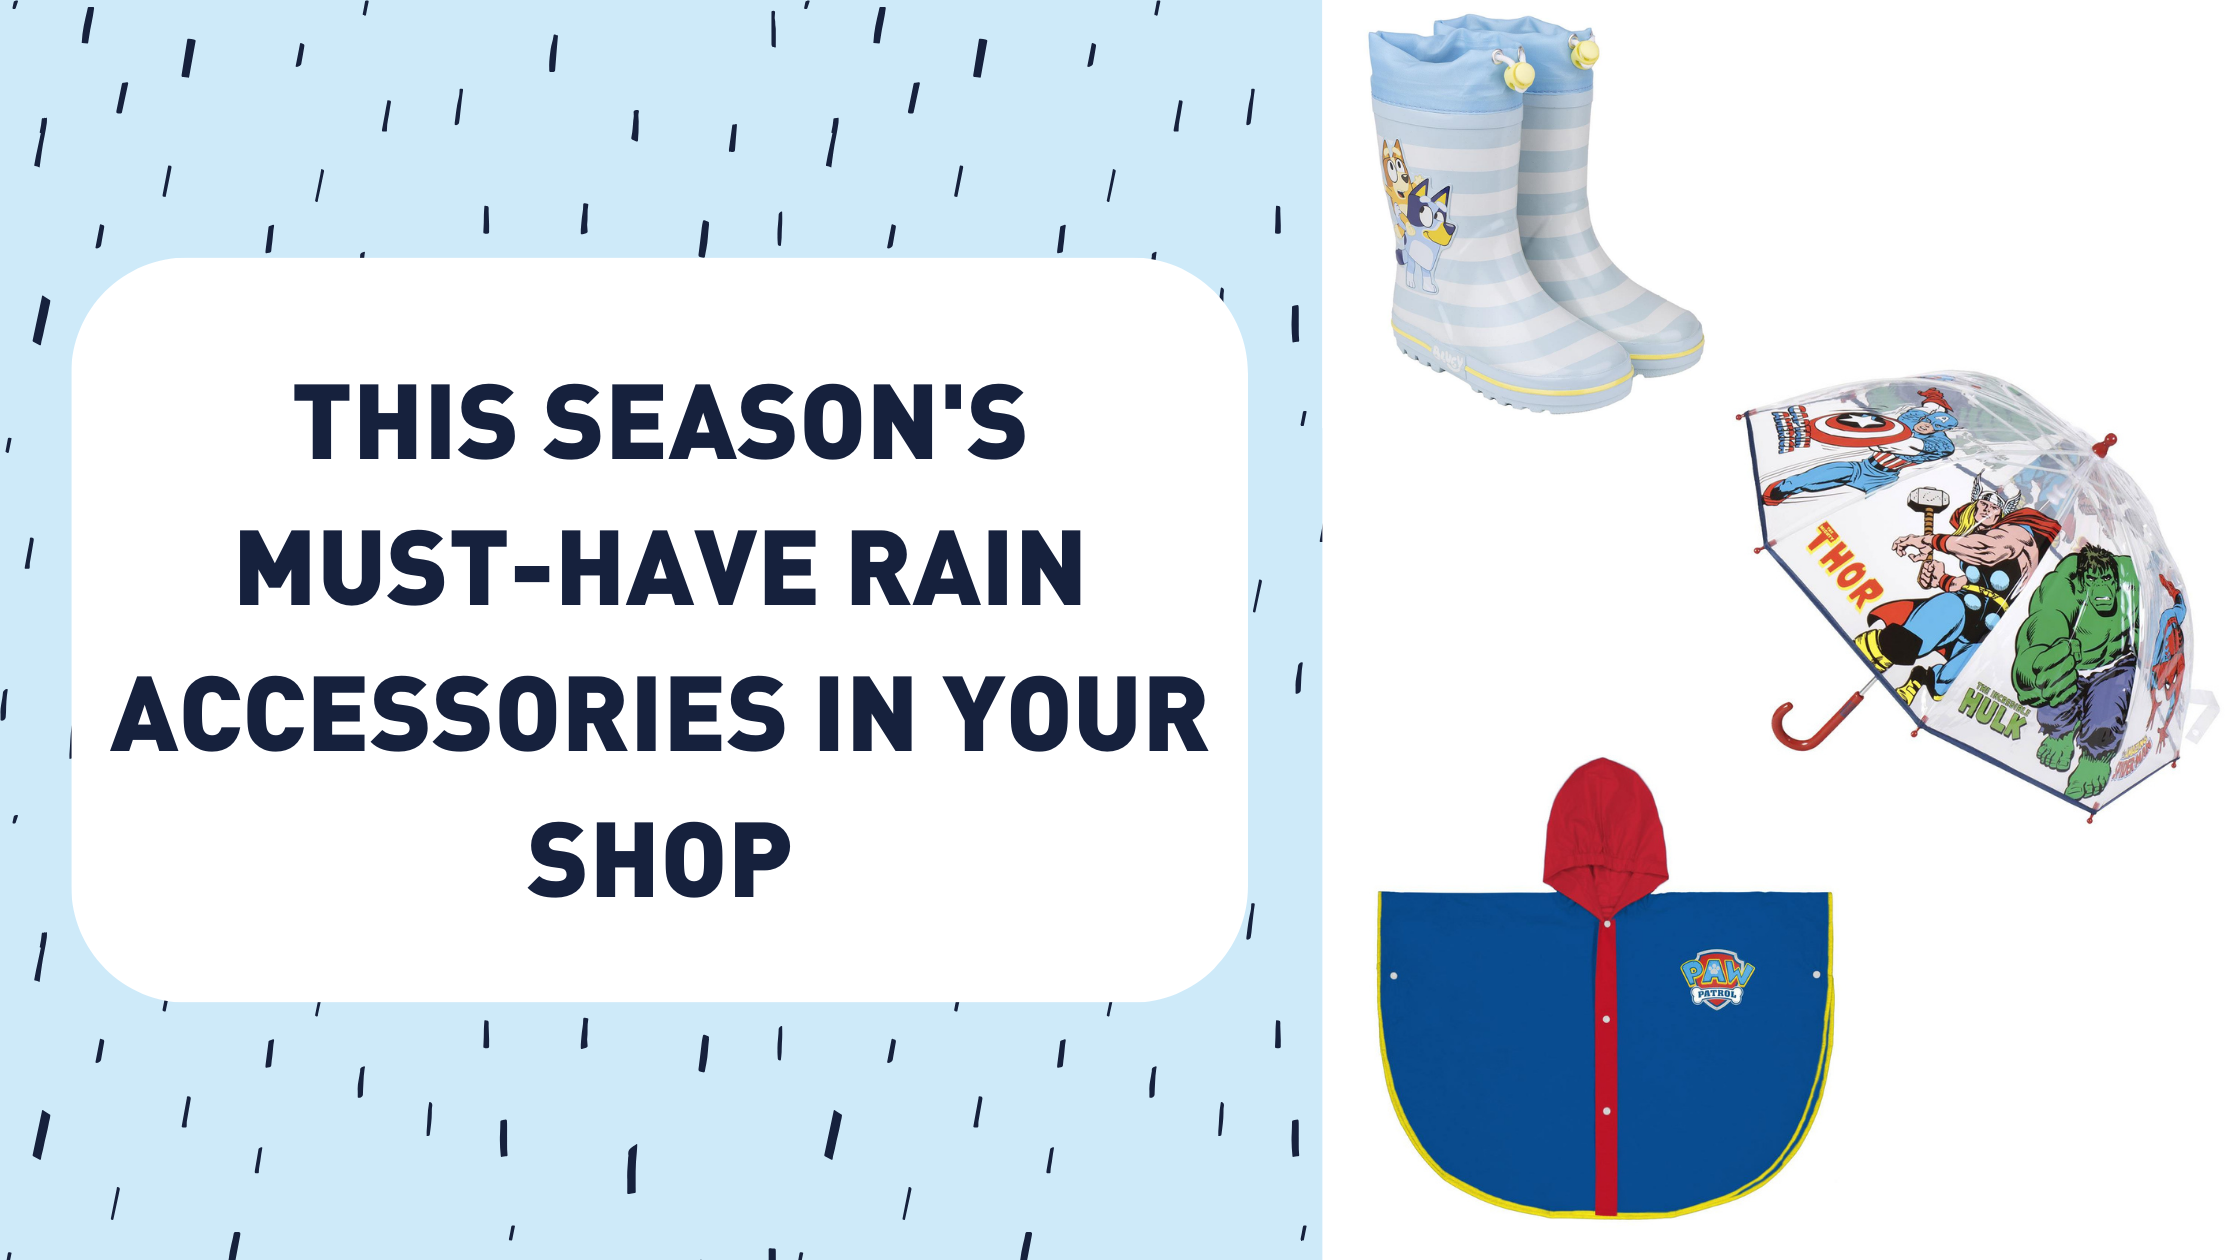 This season's must-have rain accessories in your shop